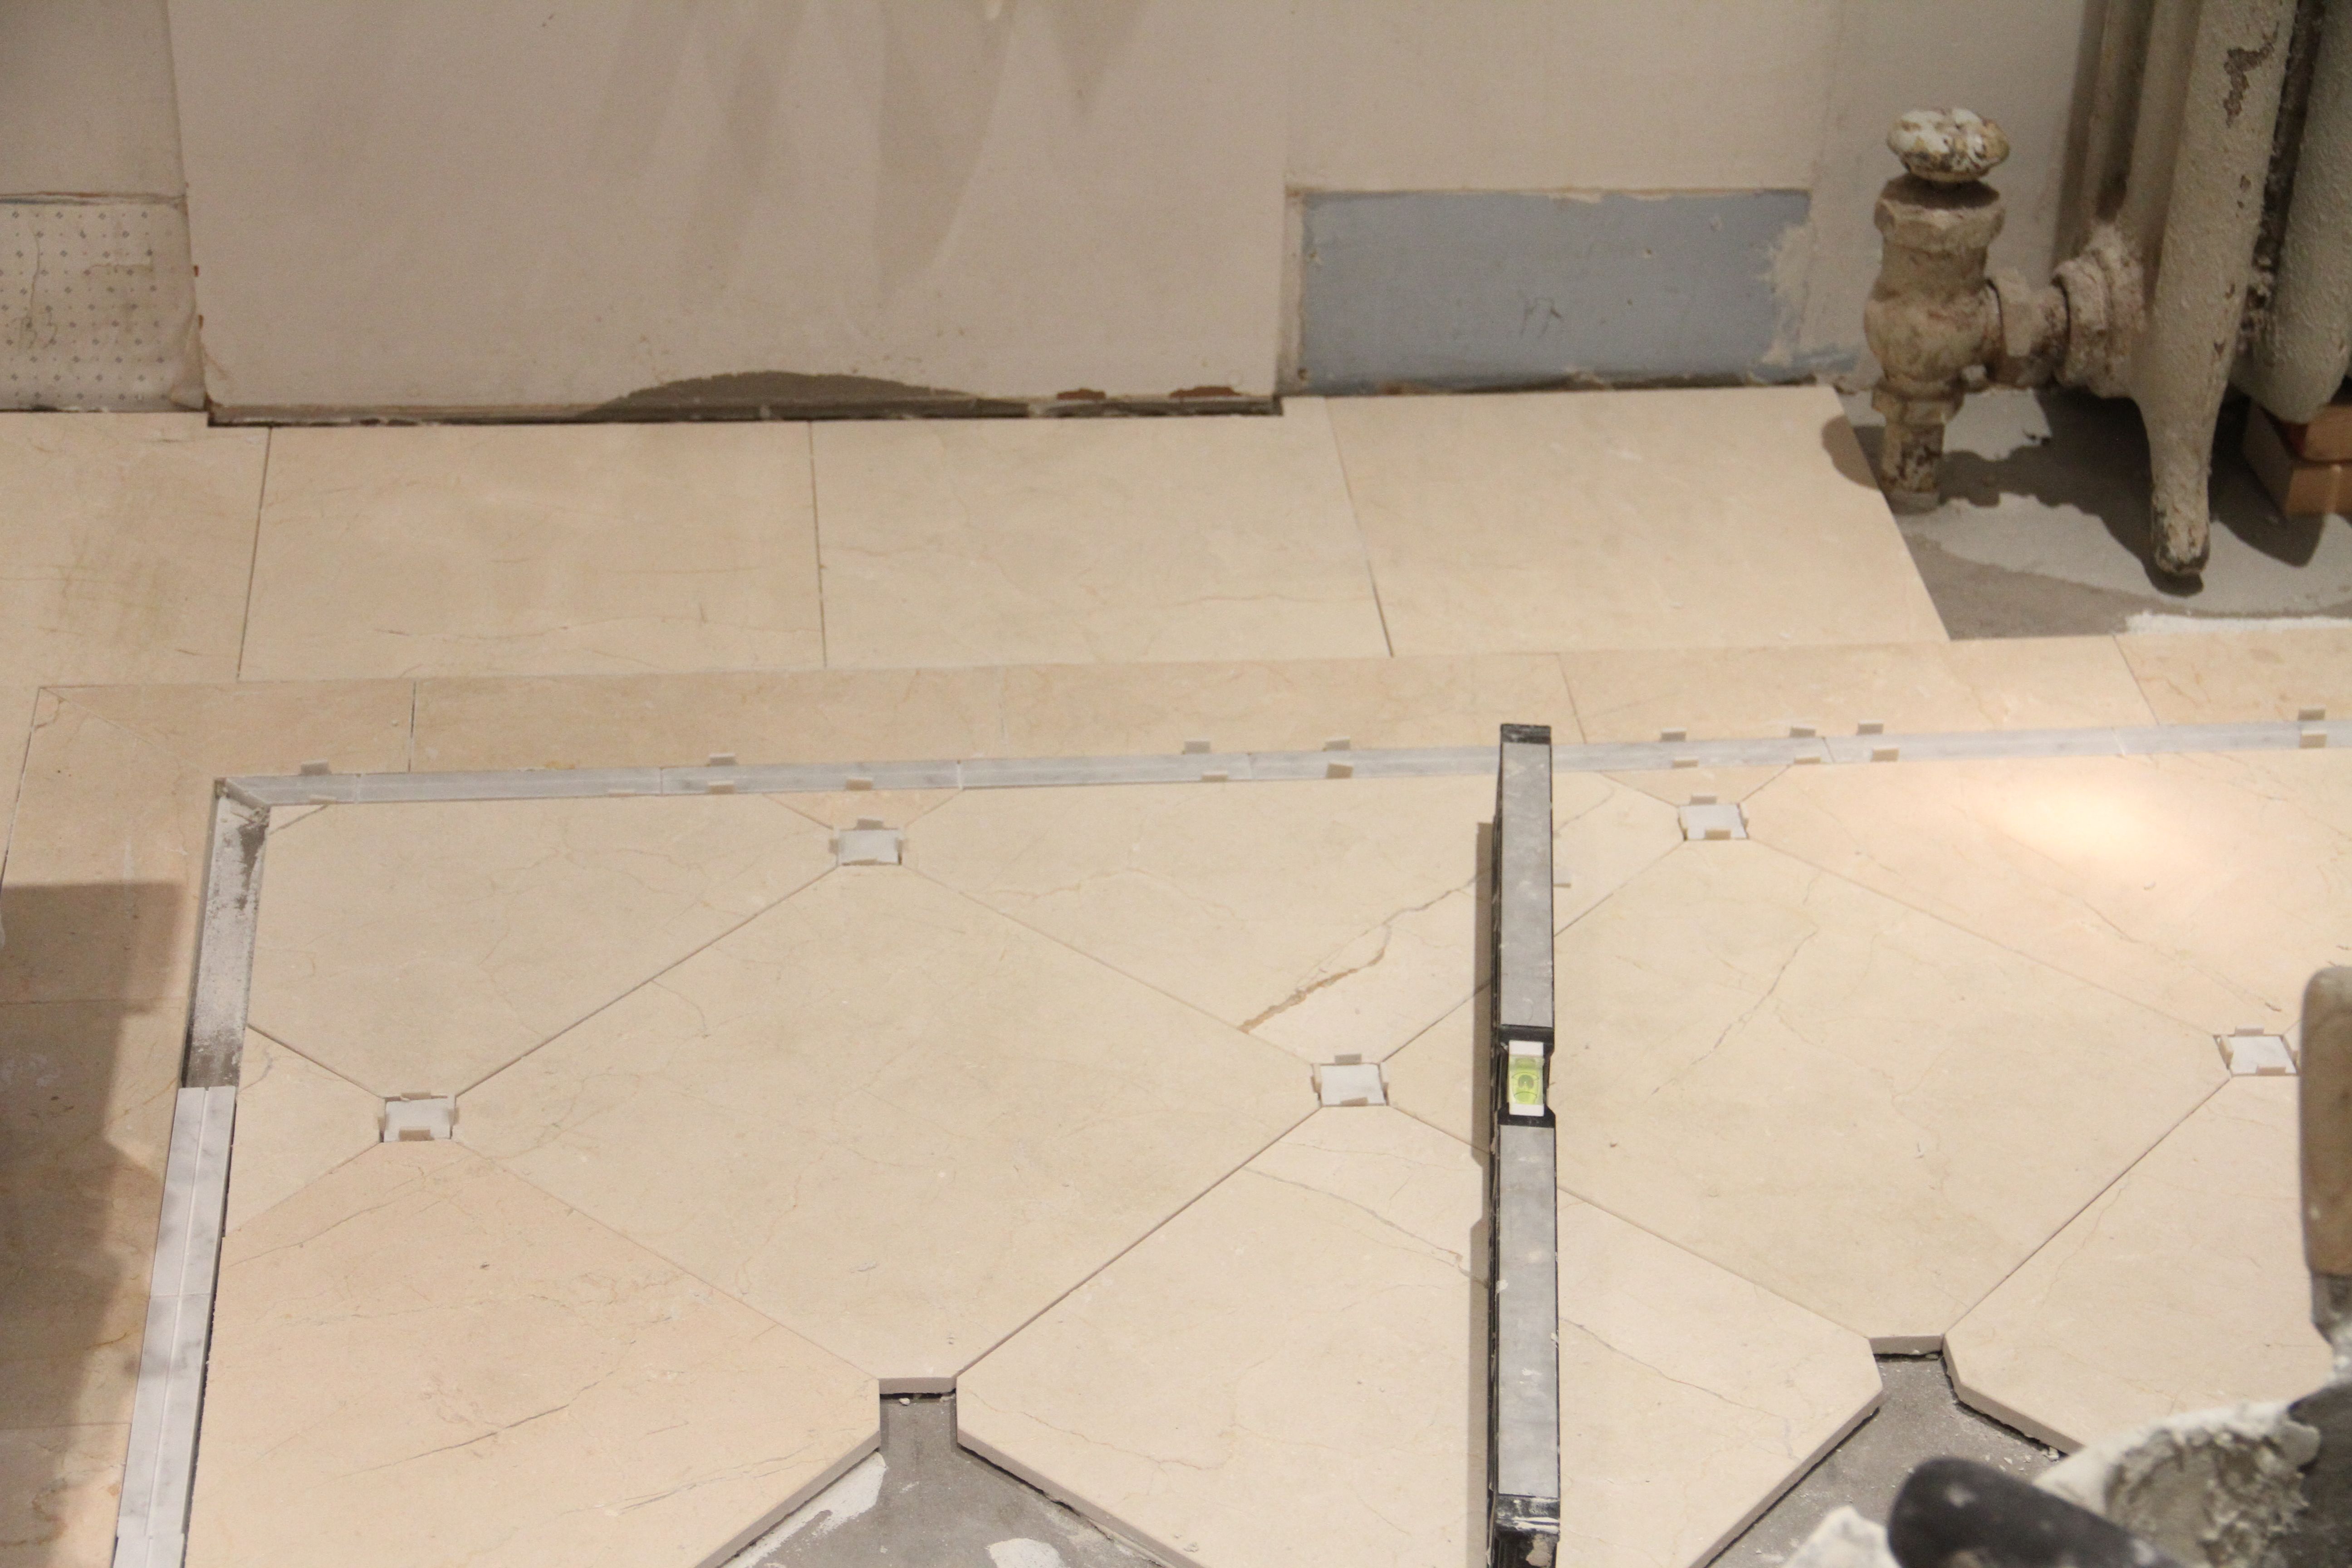 Each area was checked for level with every surrounding piece of tile. That floor is flat, baby!